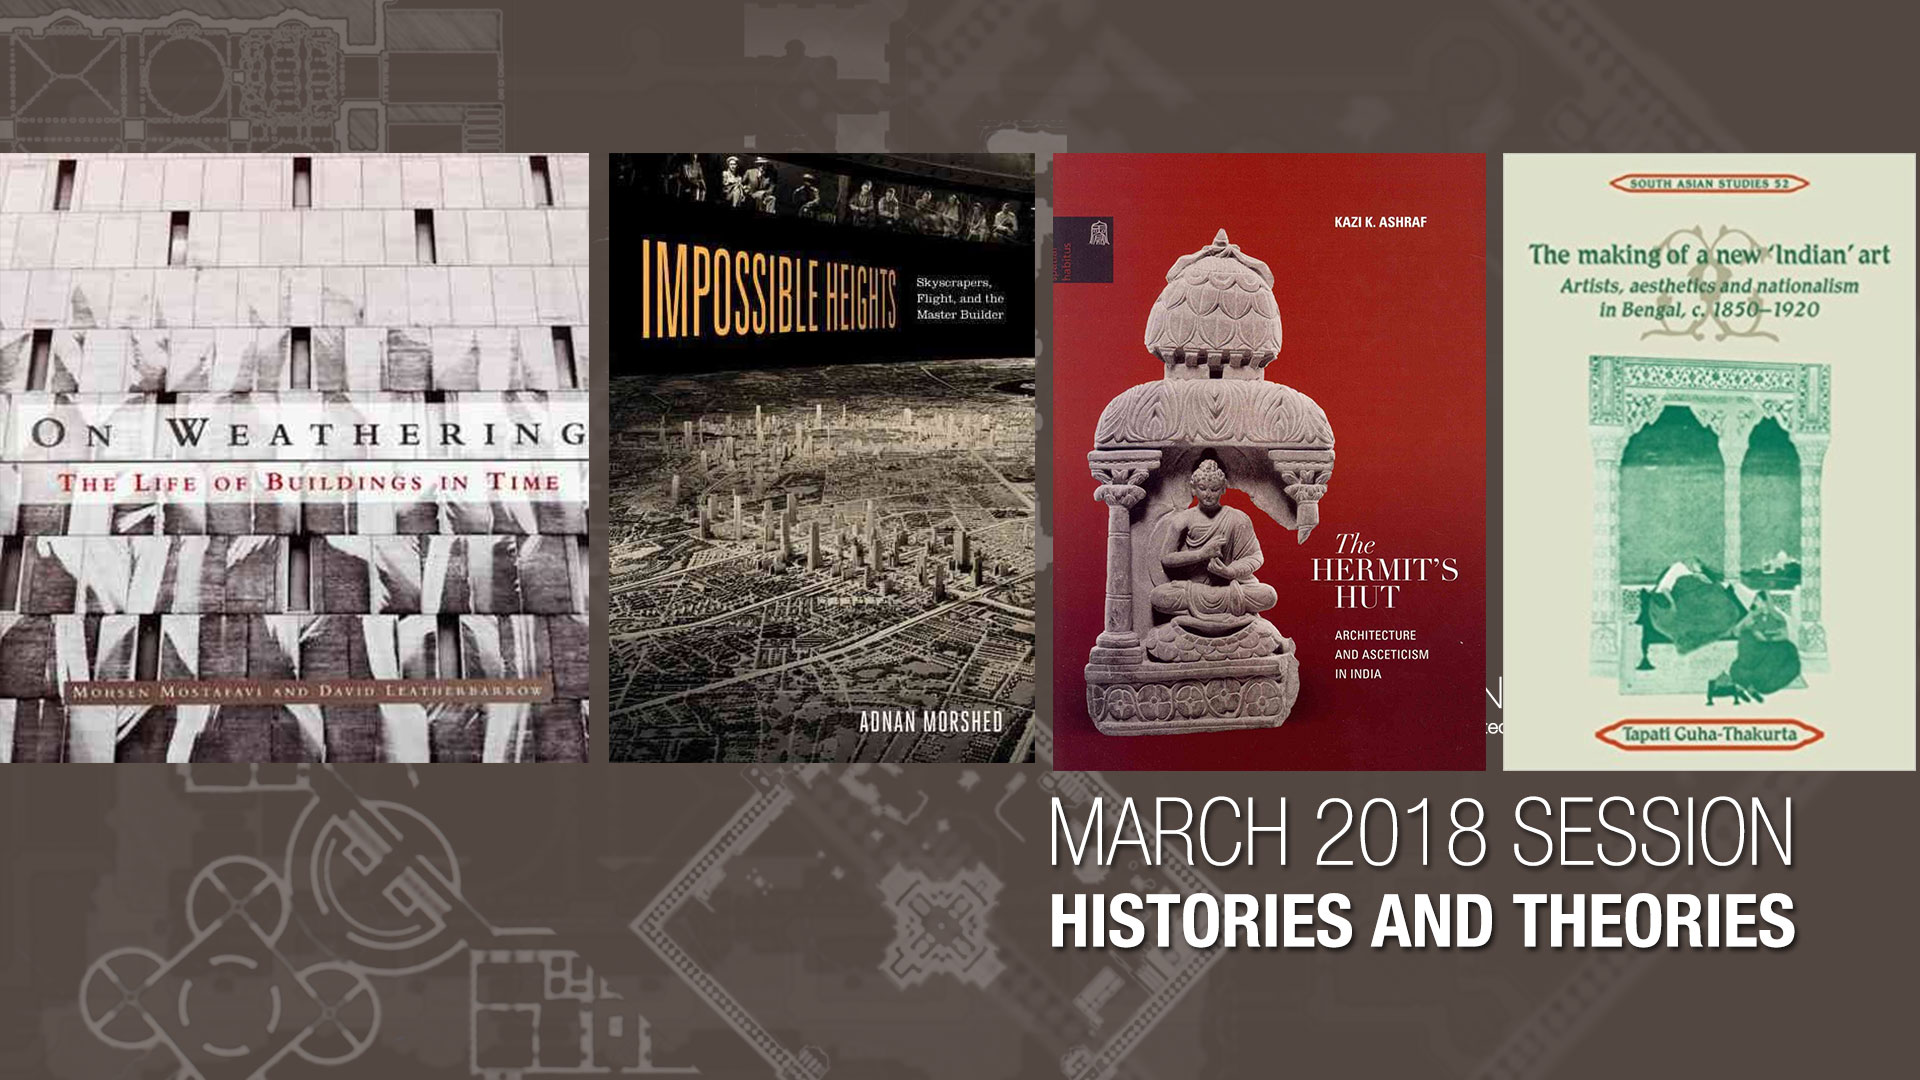 March Session 2018 Histories and Theories highlights